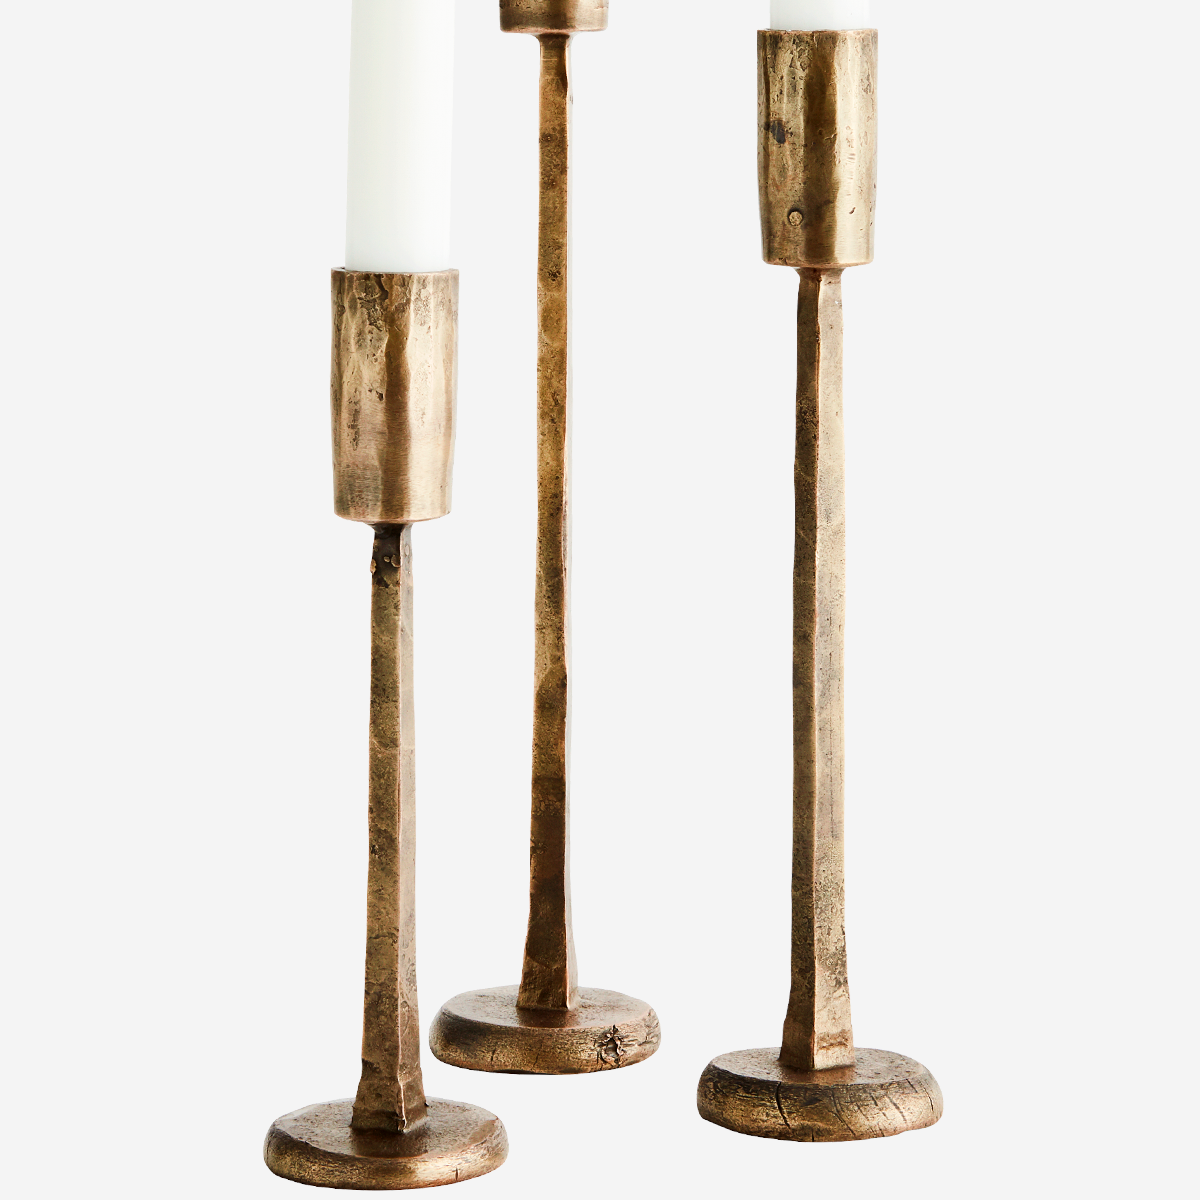 Hand Forged Candle Holders
Set Of 3 -
Madam Stoltz